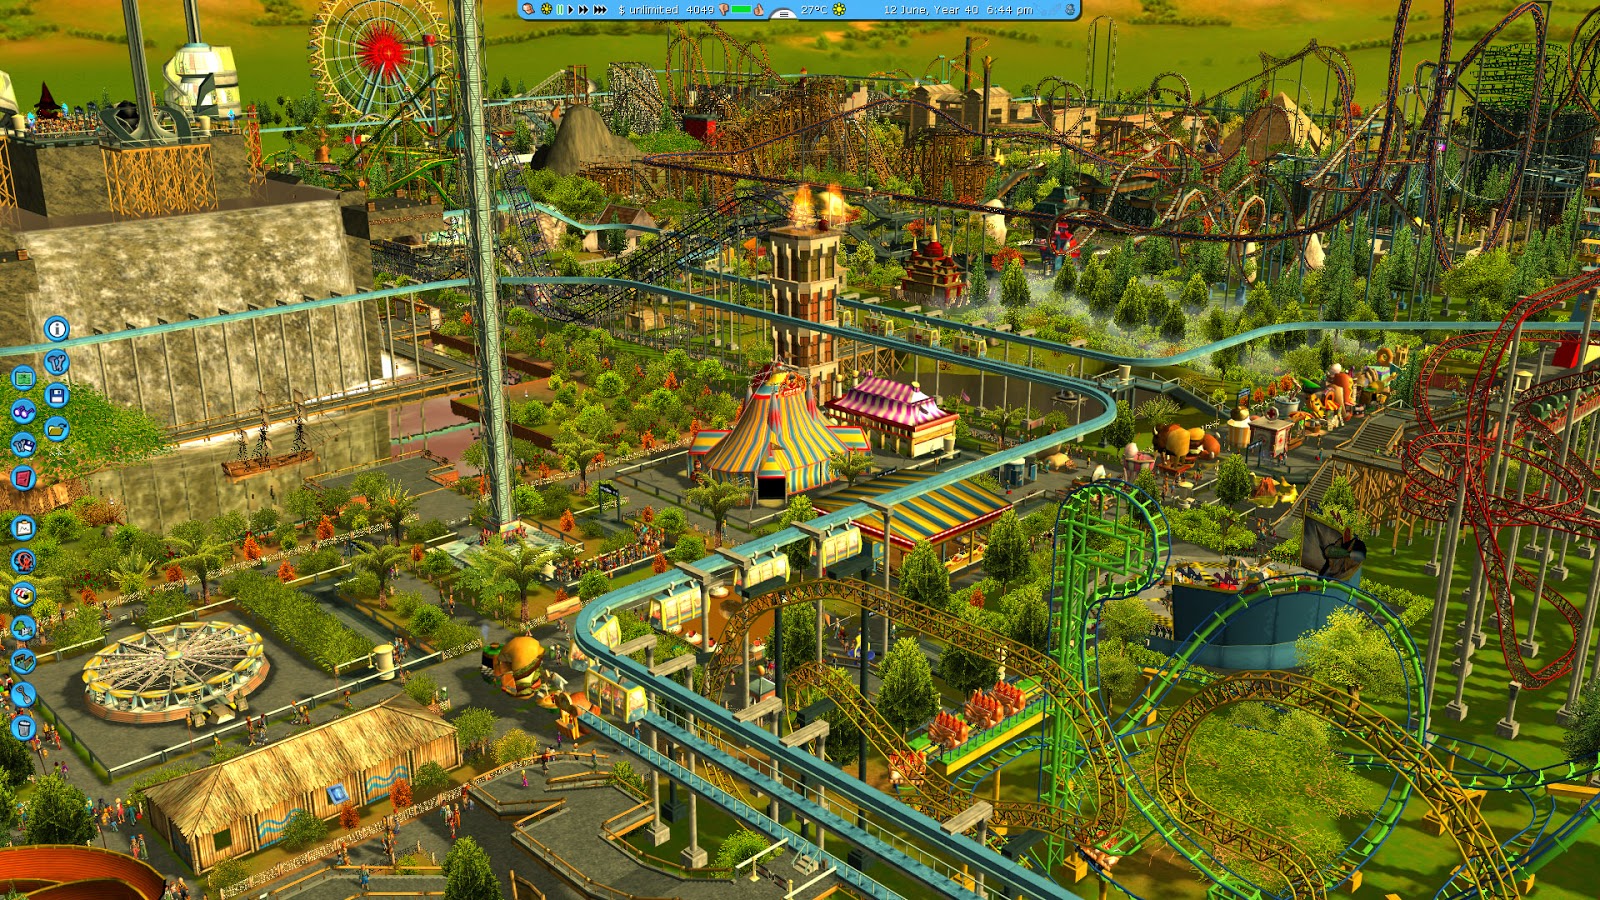 free roller coaster tycoon 1 full version